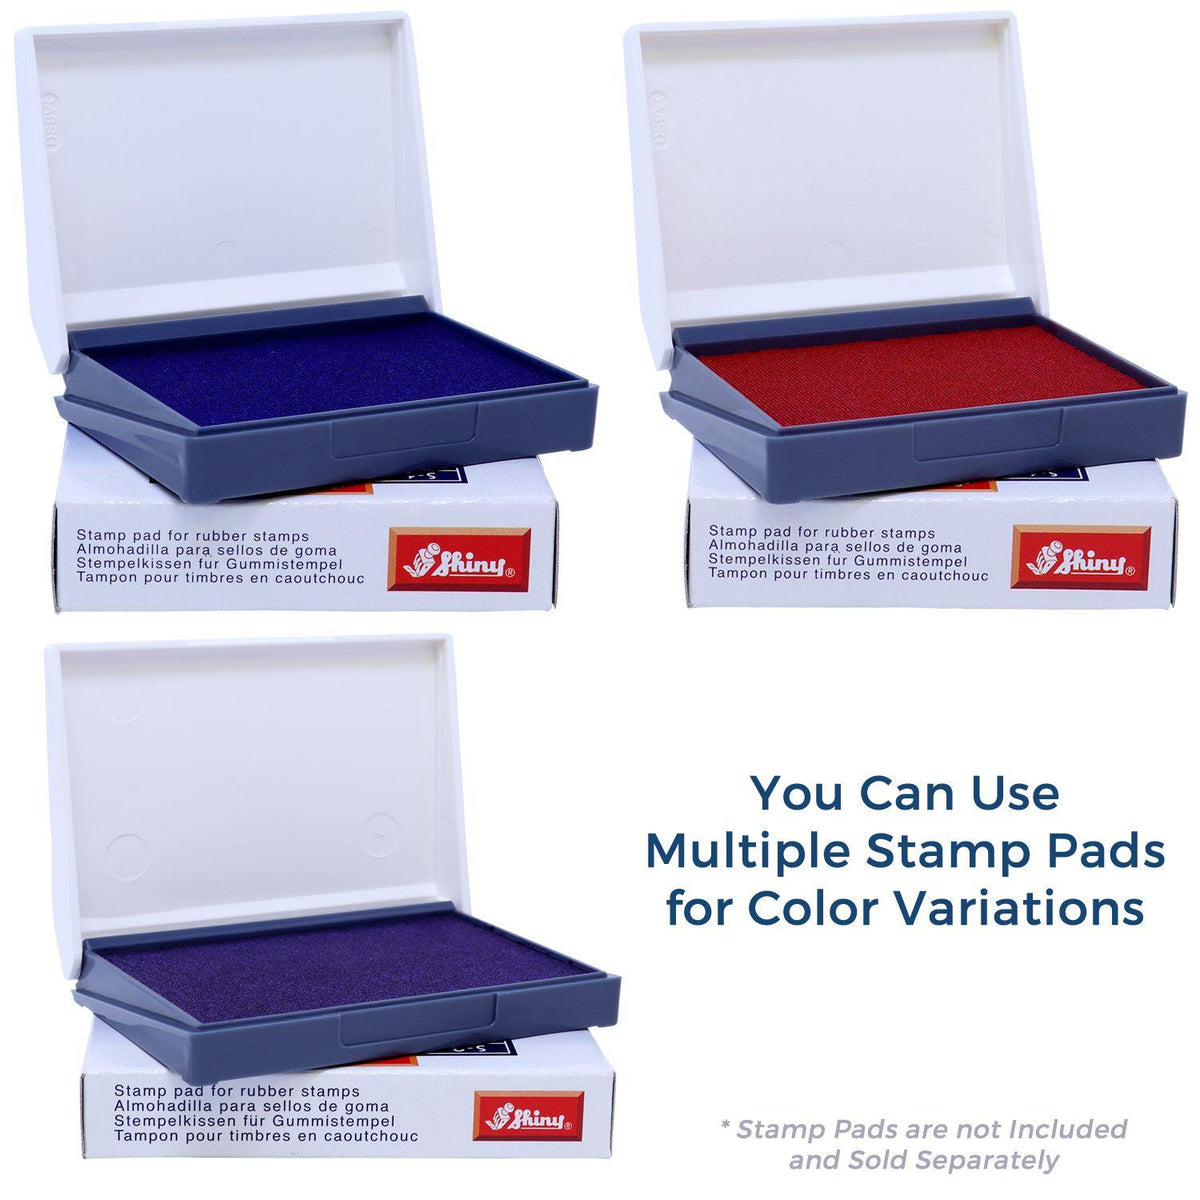 Stamp Pads for Large Package Services Rubber Stamp Available